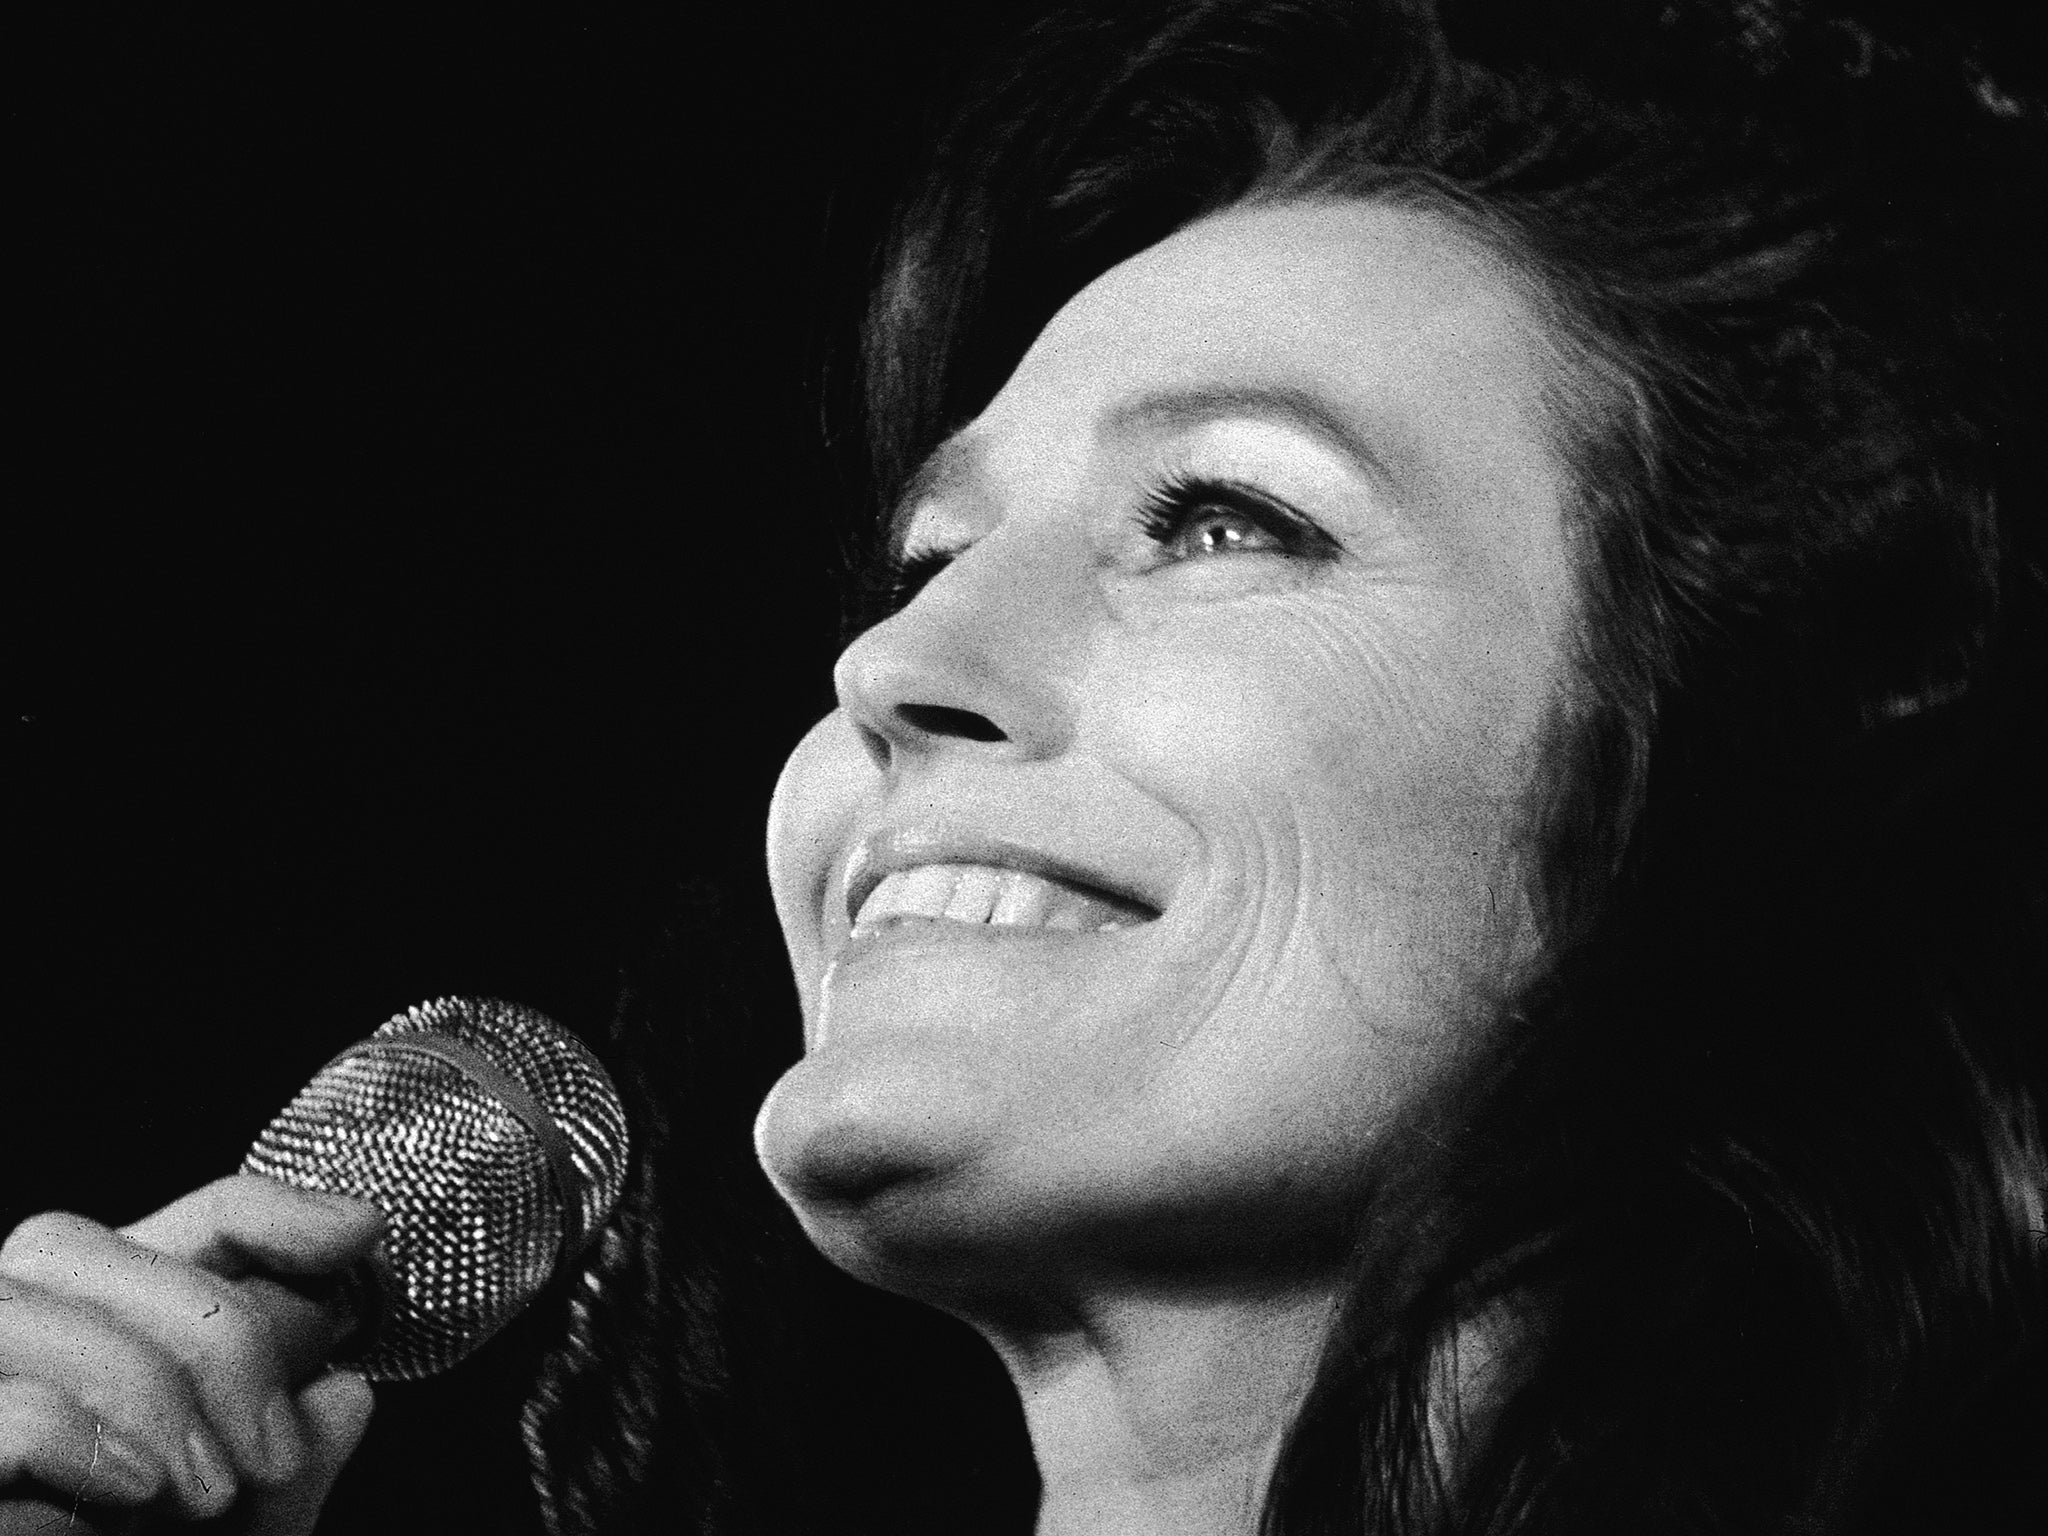 Trailblazer Lynn’s songs were delivered ‘from a distinctly female point of view‘